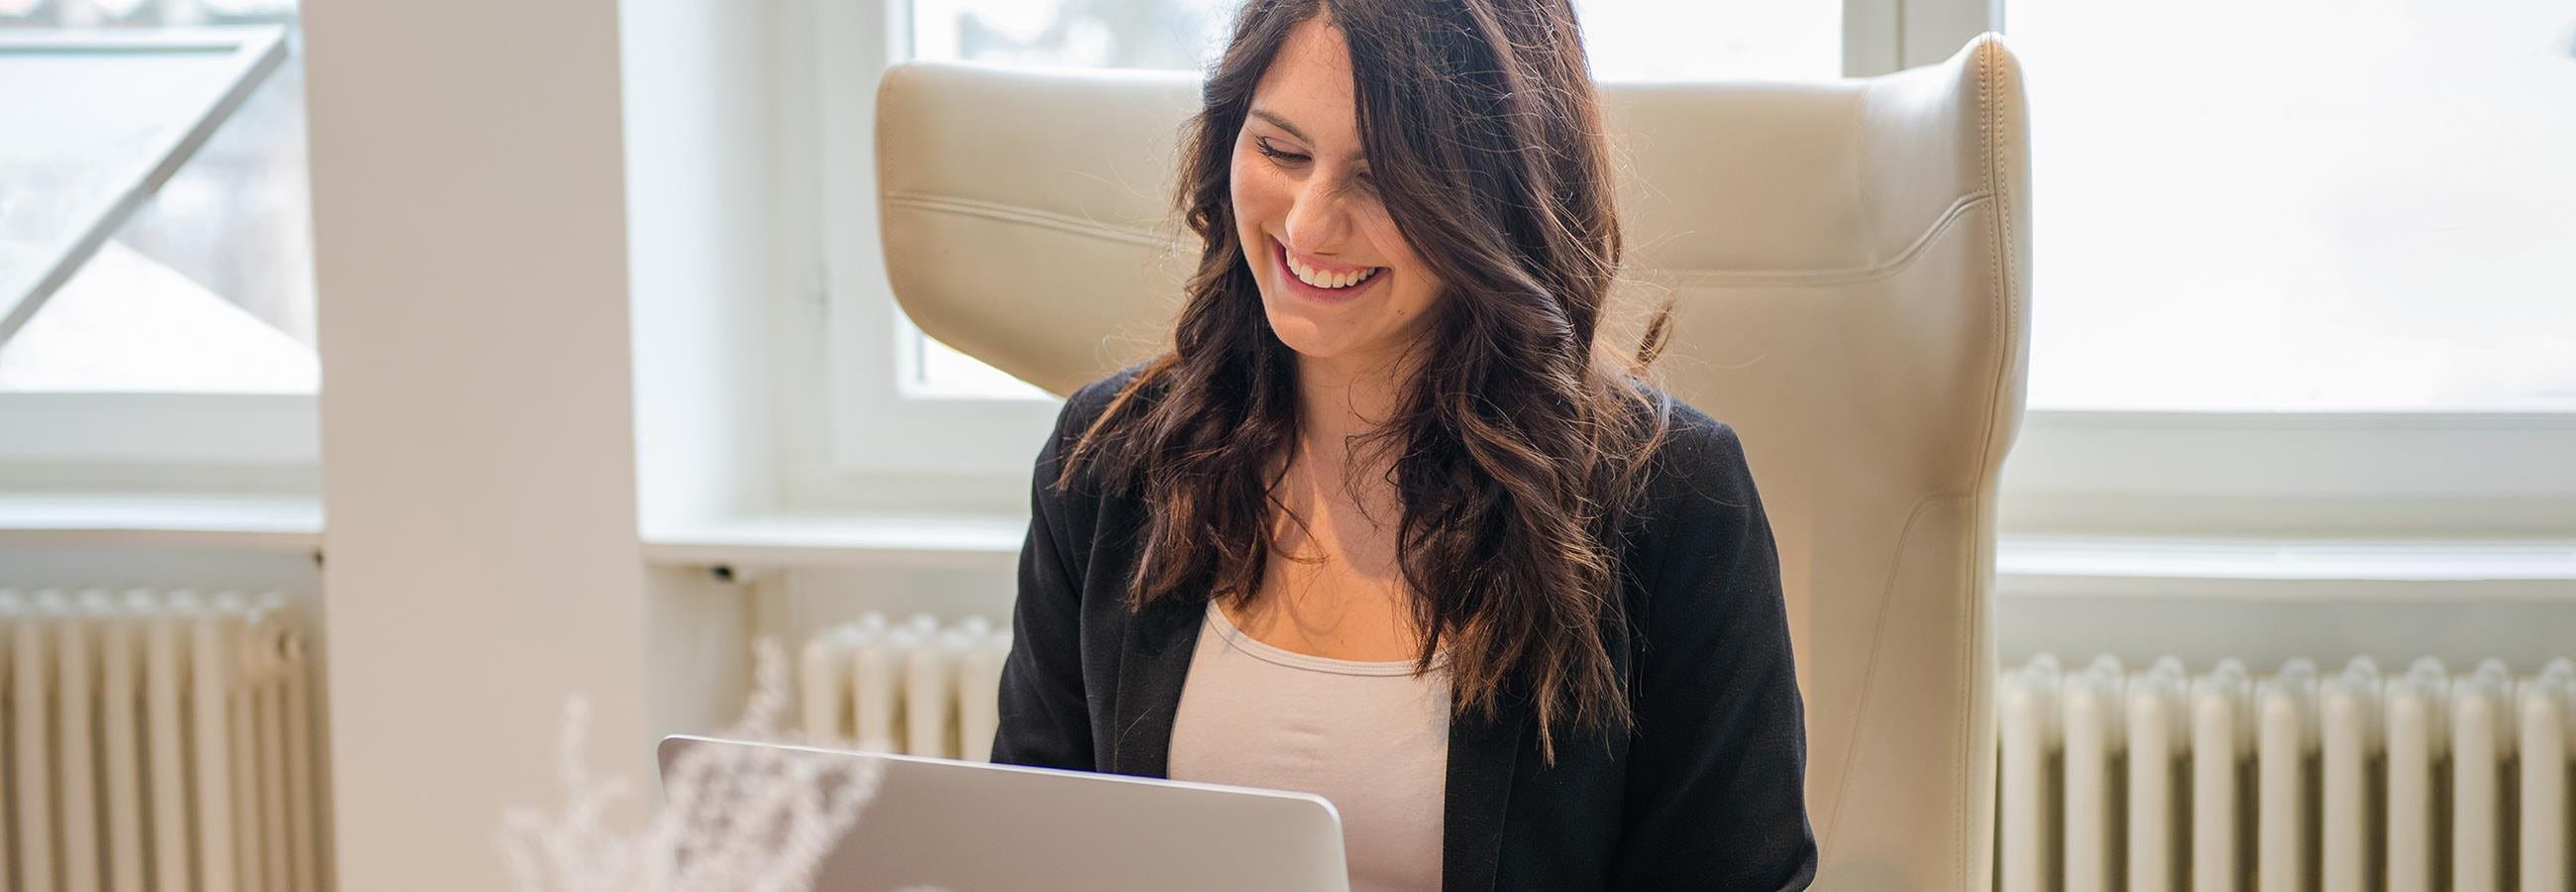 Young woman sitting at laptop and laughing